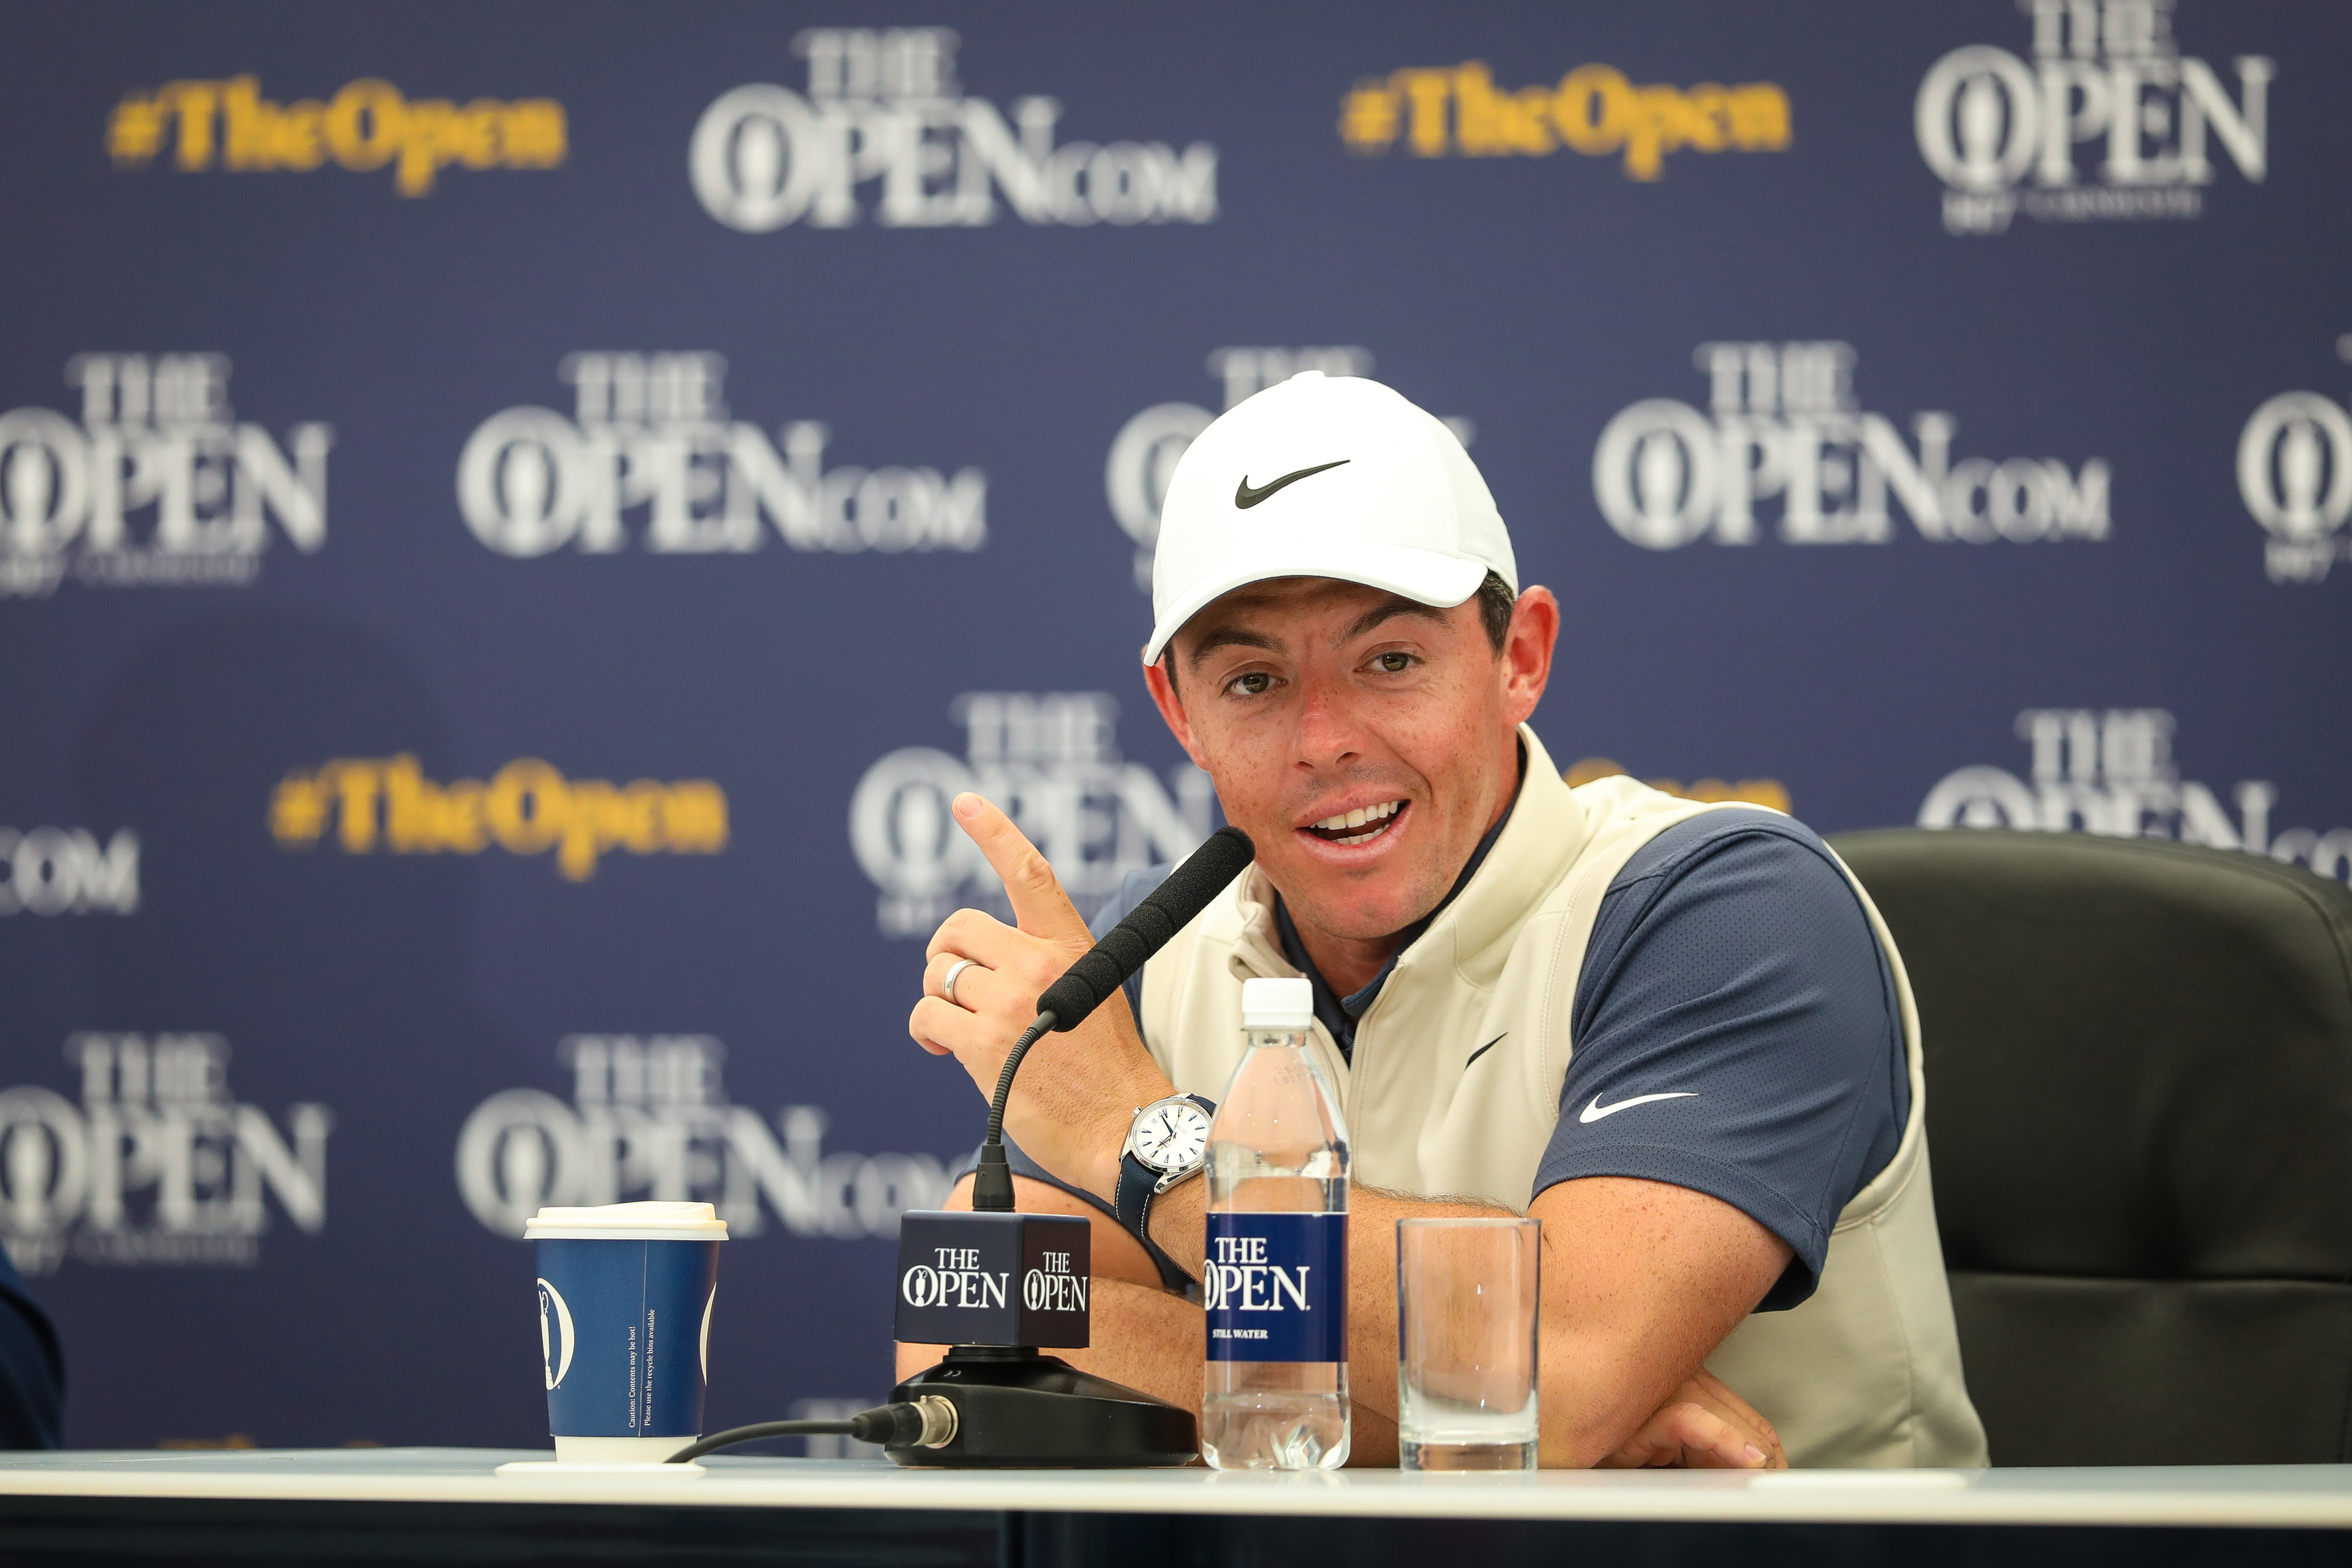 Rory McIlroy speaking ahead of this week's Open getting under way.